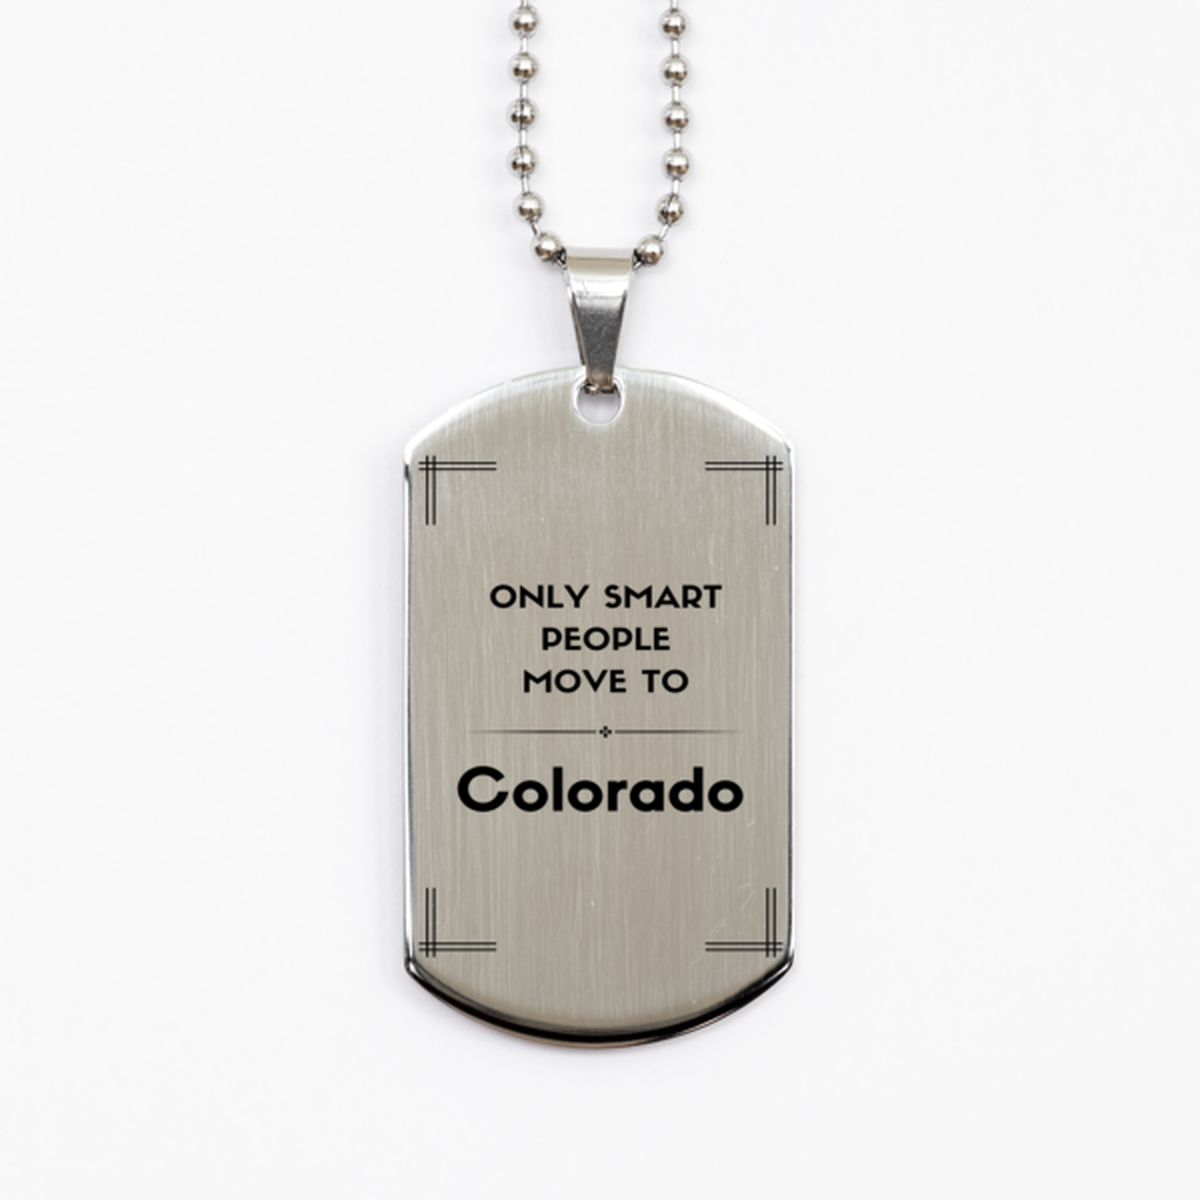 Only smart people move to Colorado Silver Dog Tag, Gag Gifts For Colorado, Move to Colorado Gifts for Friends Coworker Funny Saying Quote